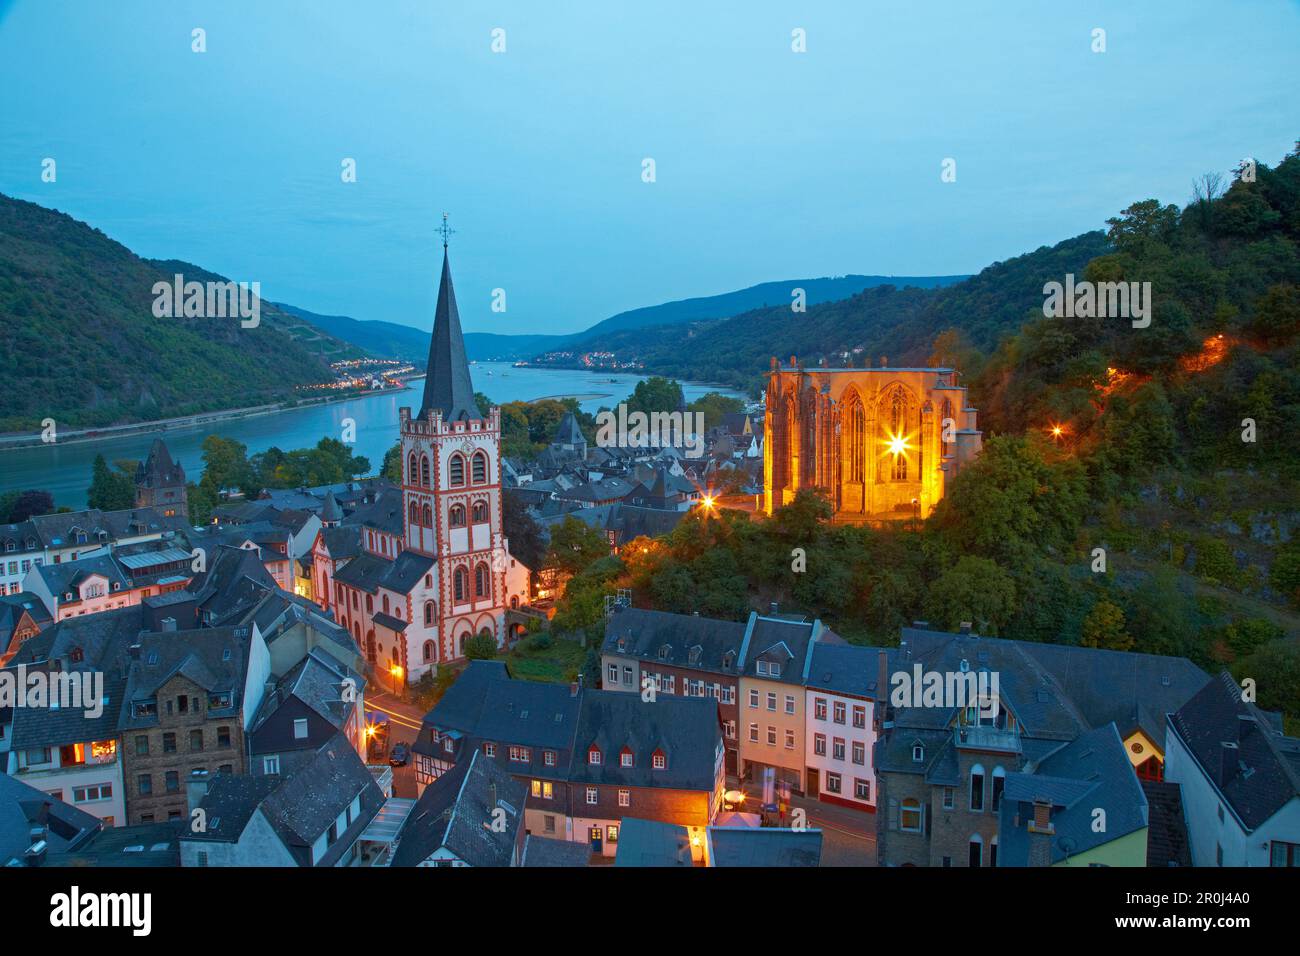 View across the river Rhine at Bacharach with Wernerkapelle and St. Martin's church, Mittelrhein, Middle Rhine, Rhineland - Palatinate, Germany, Europ Stock Photo